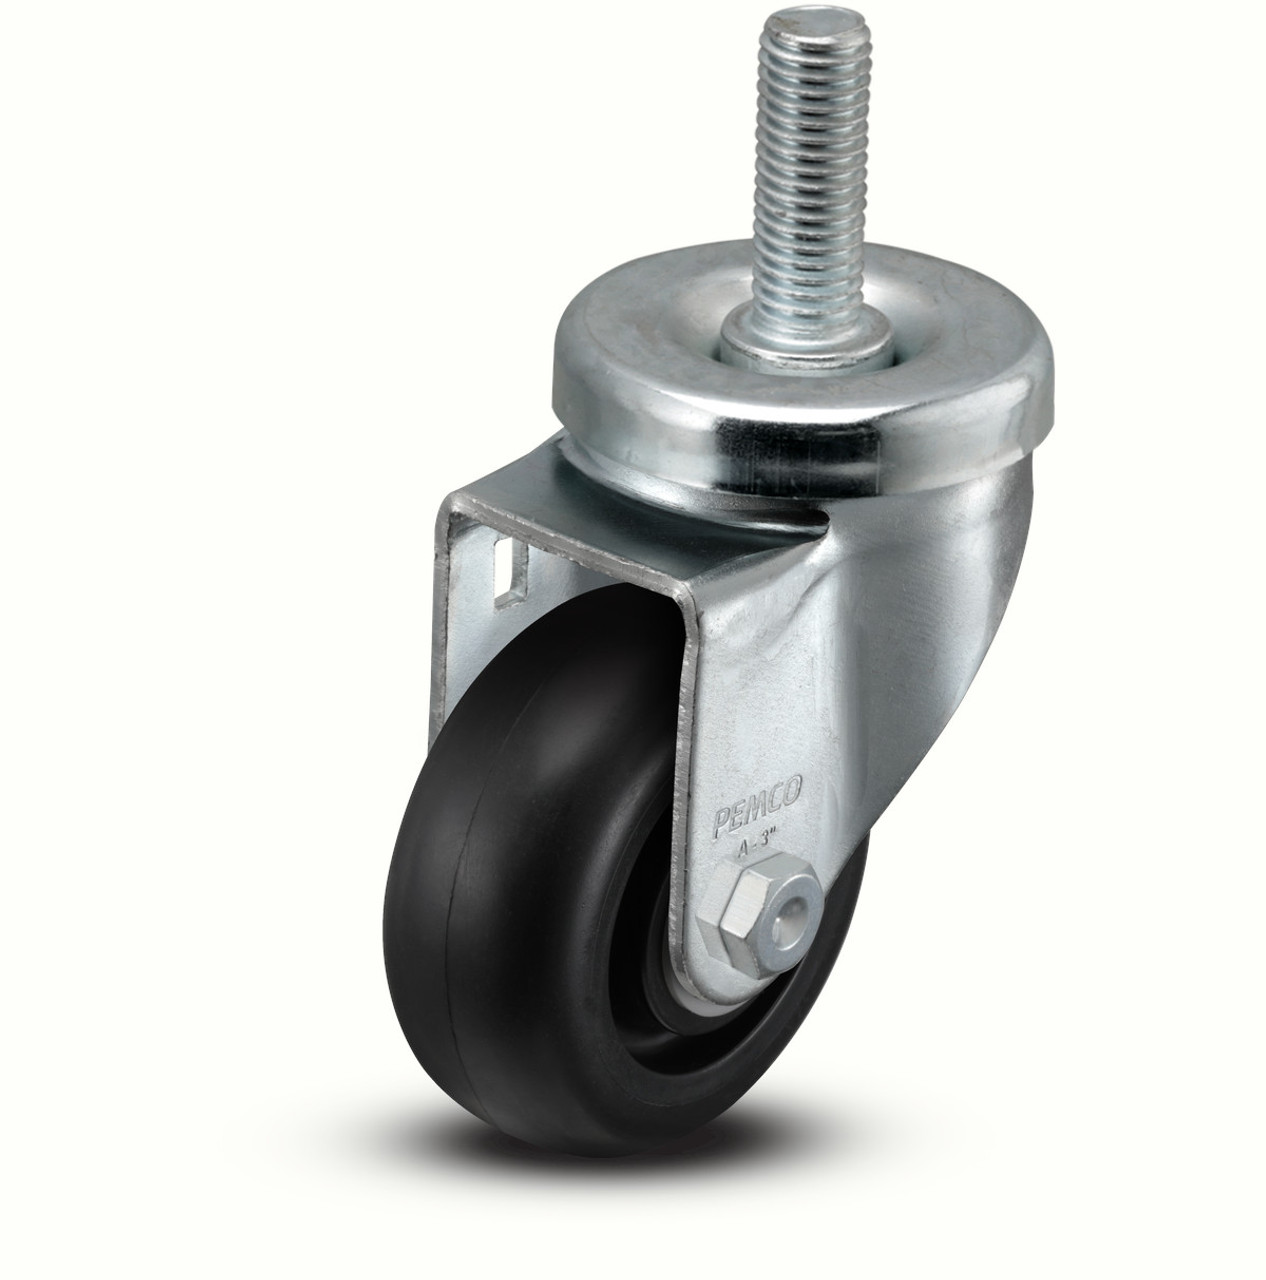 AS30T2POD 3" threaded stem caster with polyolefin wheel